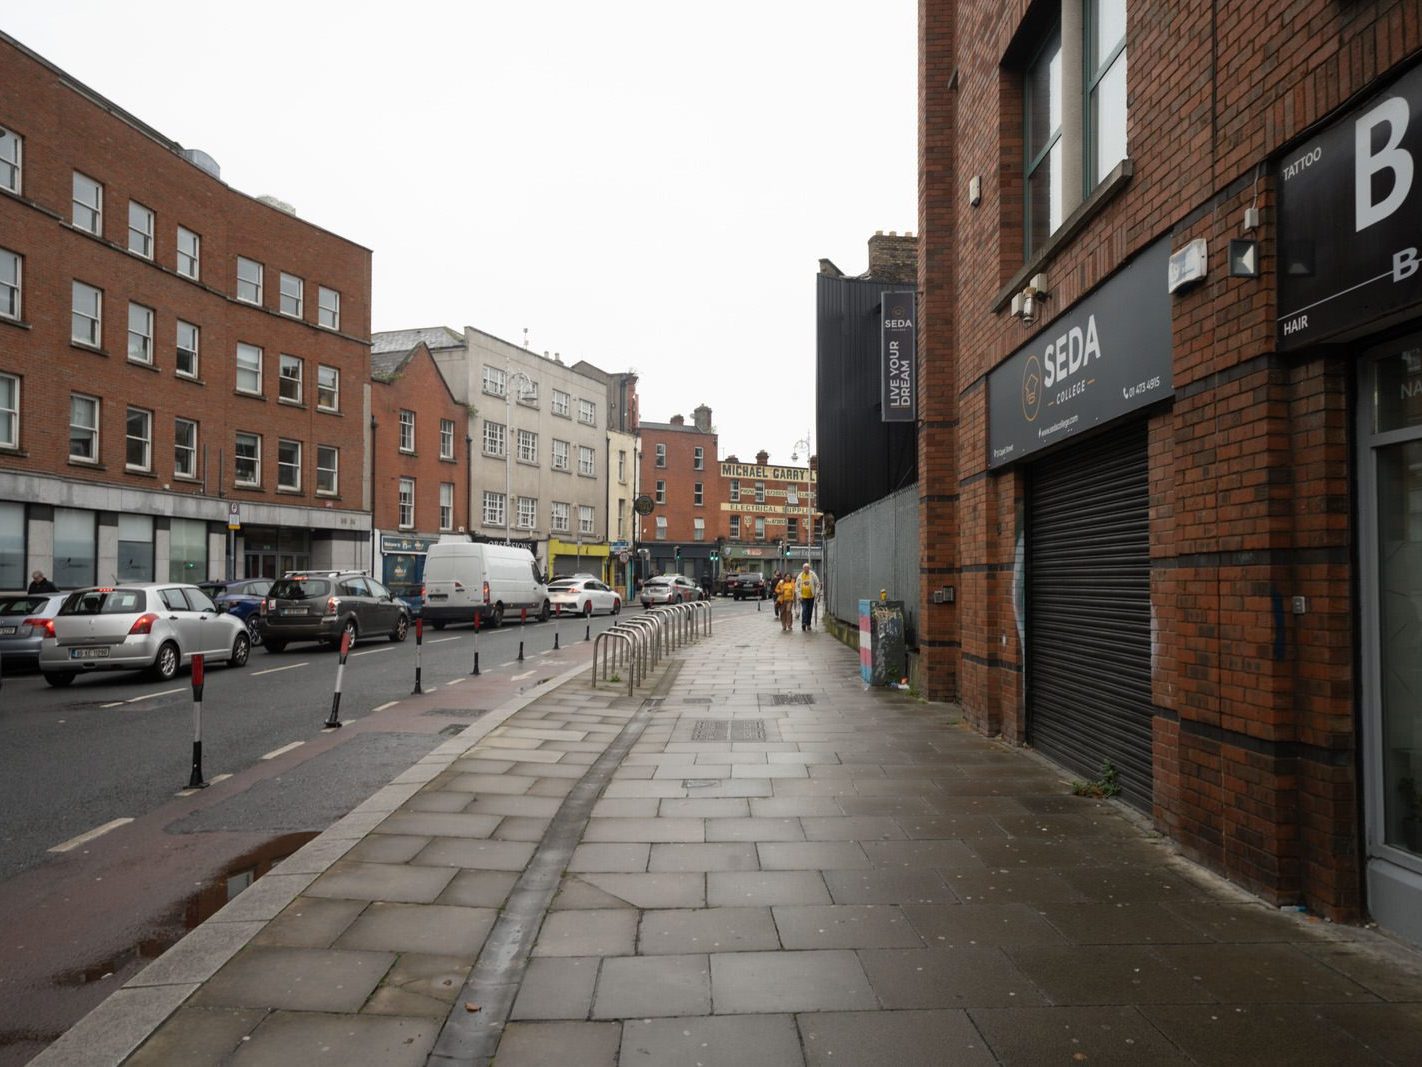 CAPEL STREET ON A DULL WET DAY [INTERIM CAPEL STREET IMPROVEMENT WORKS ARE NOW ONGOING] 039